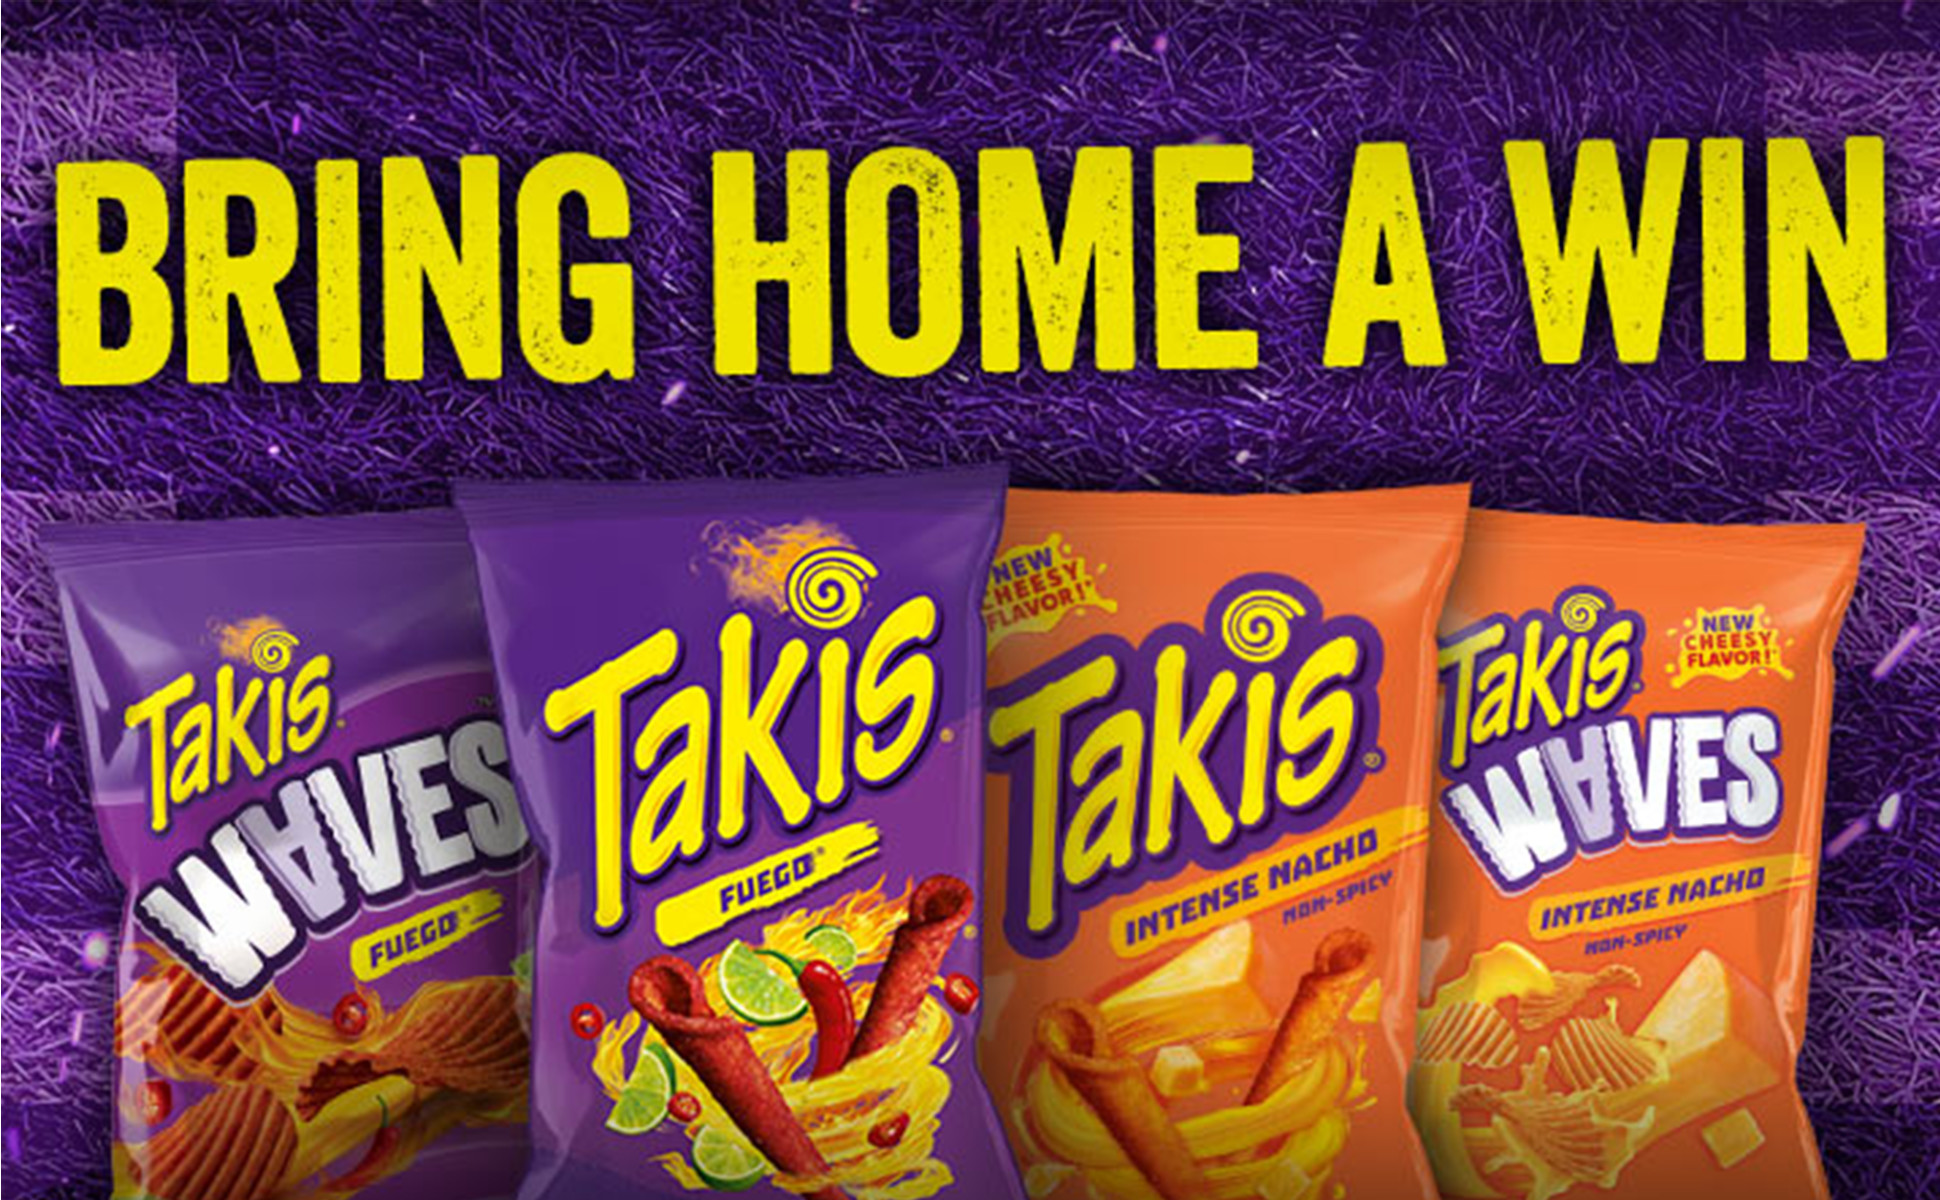  Takis Chippz Classic Traditional Potato Chips, Salted